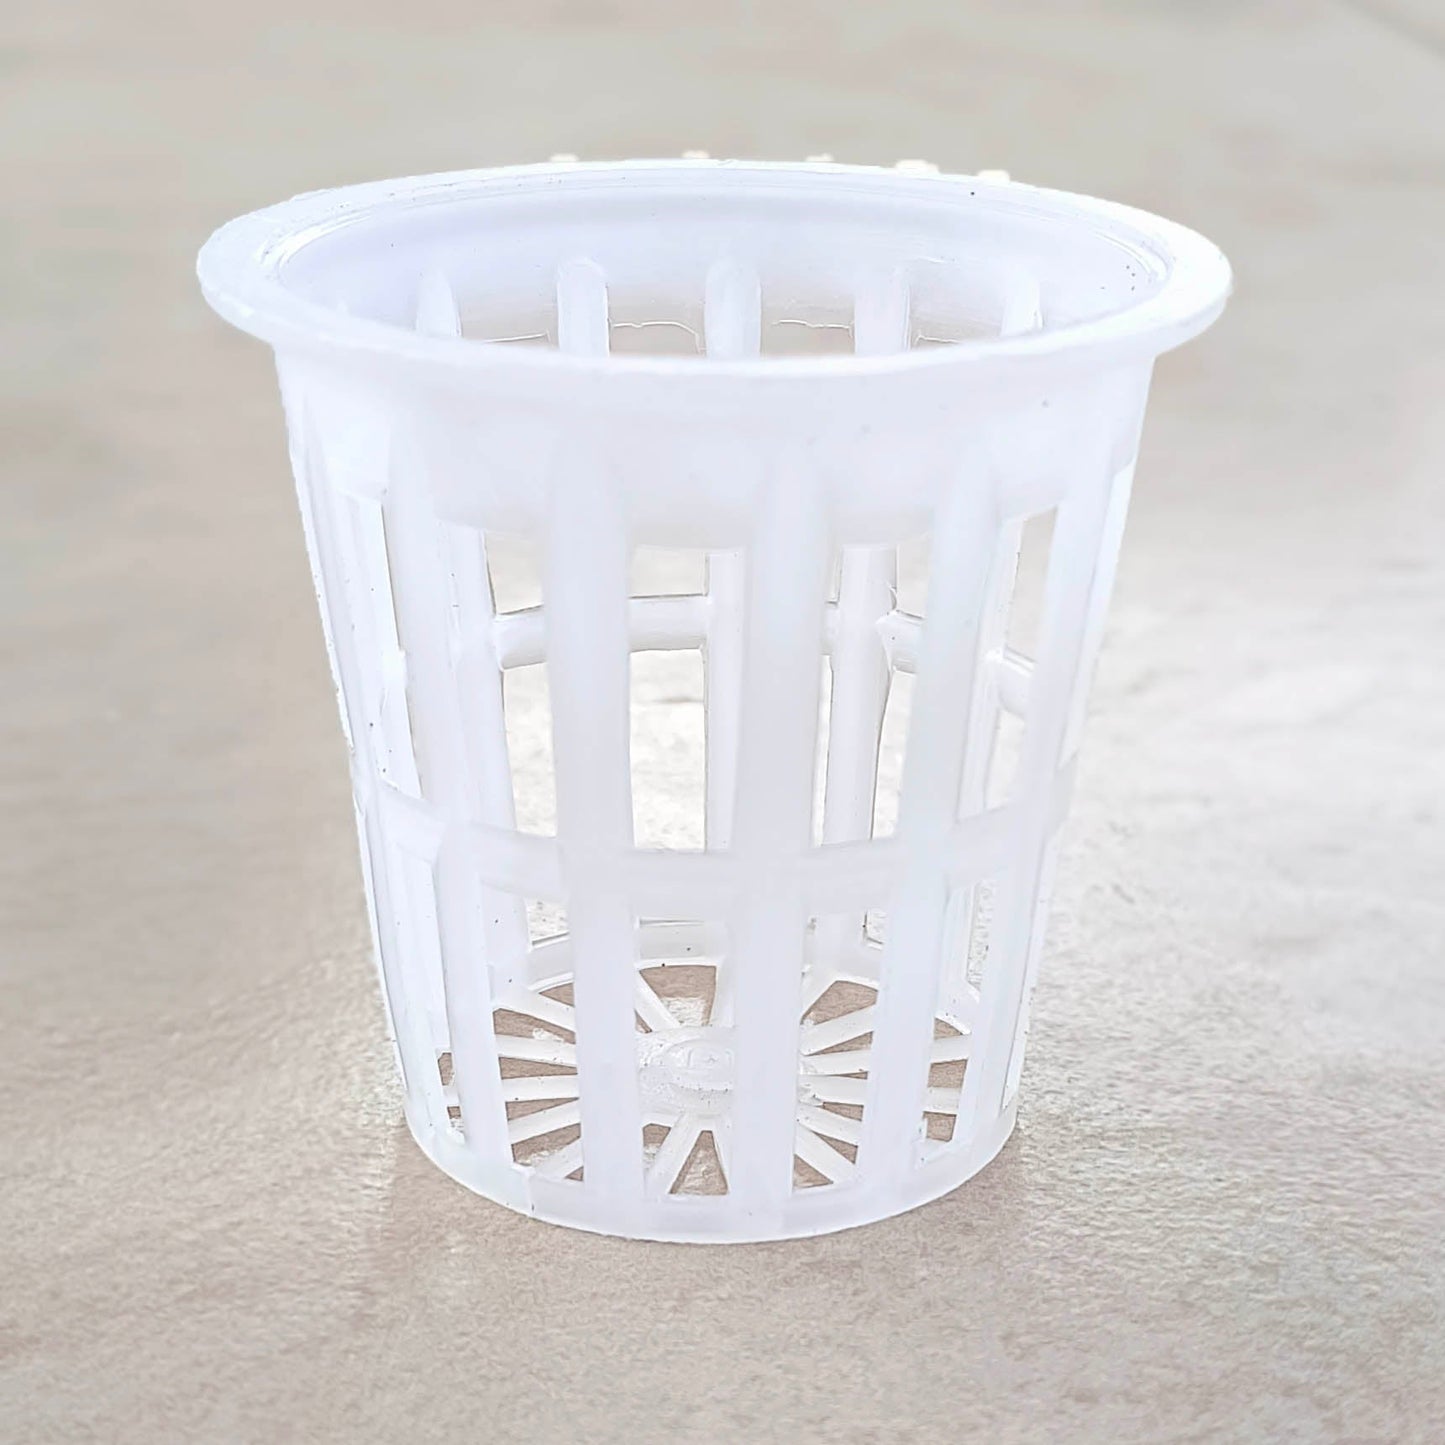 Casa De Amor Lightweight Economy Net Pot Cups for Hydroponics and Aquaponics - 2" Diameter Thin Lip Design with Slotted Mesh Sides- White